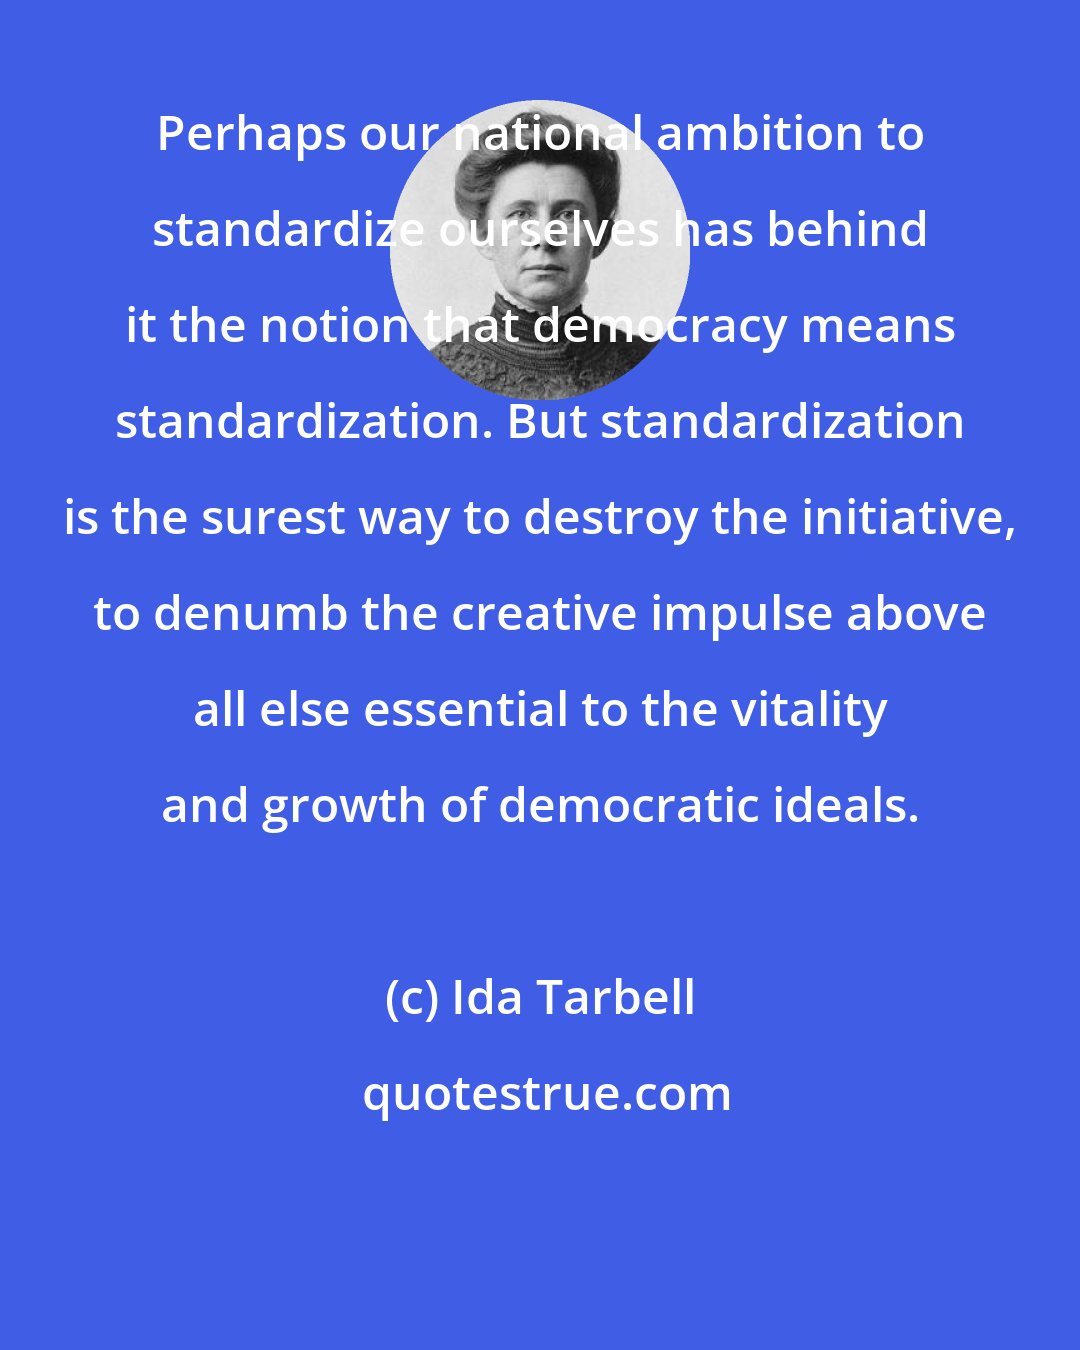 Ida Tarbell: Perhaps our national ambition to standardize ourselves has behind it the notion that democracy means standardization. But standardization is the surest way to destroy the initiative, to denumb the creative impulse above all else essential to the vitality and growth of democratic ideals.